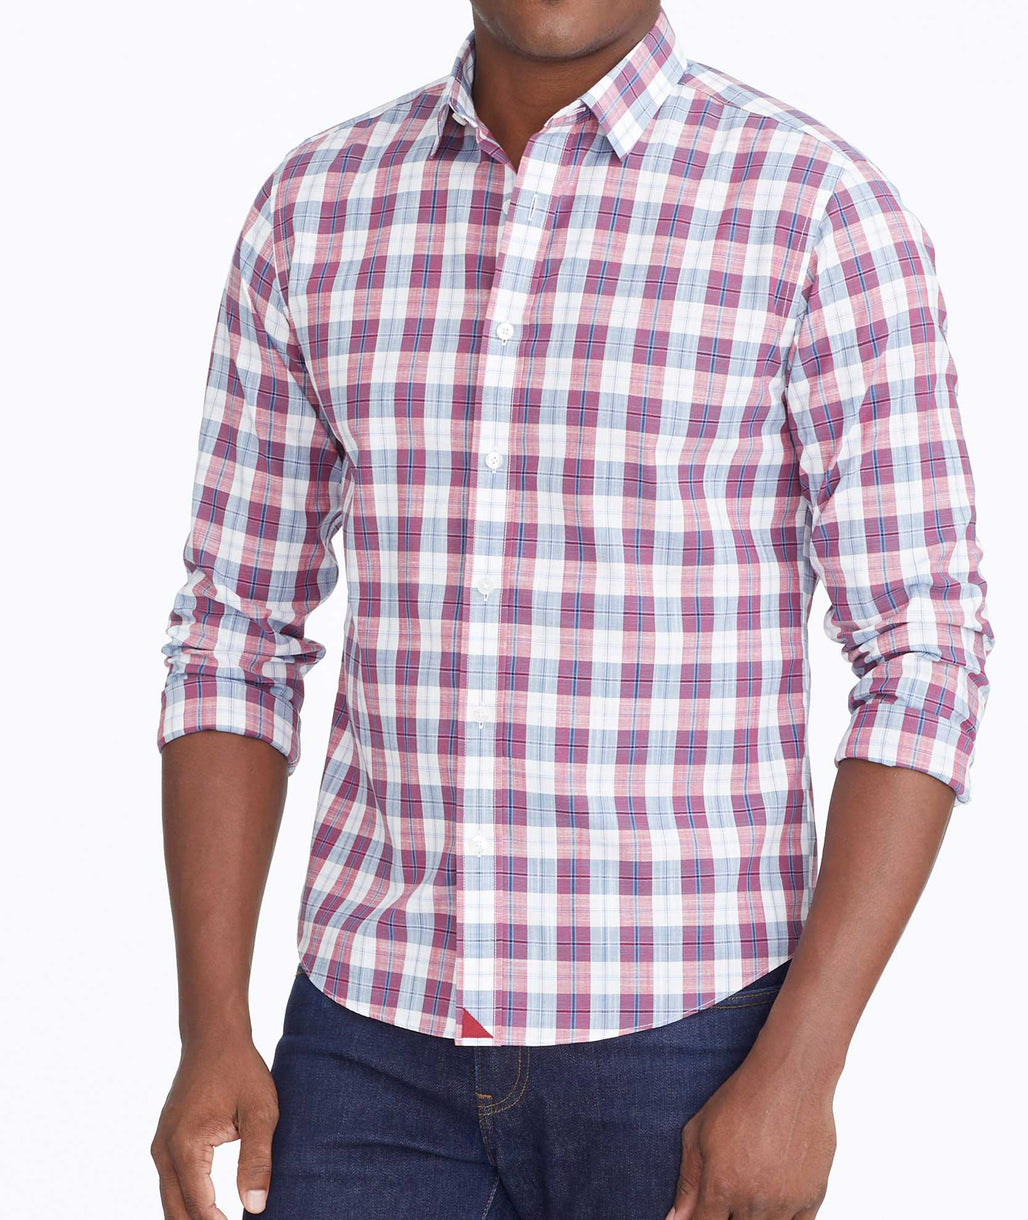 Wrinkle-Free Denner Shirt Red with White & Teal Plaid | UNTUCKit